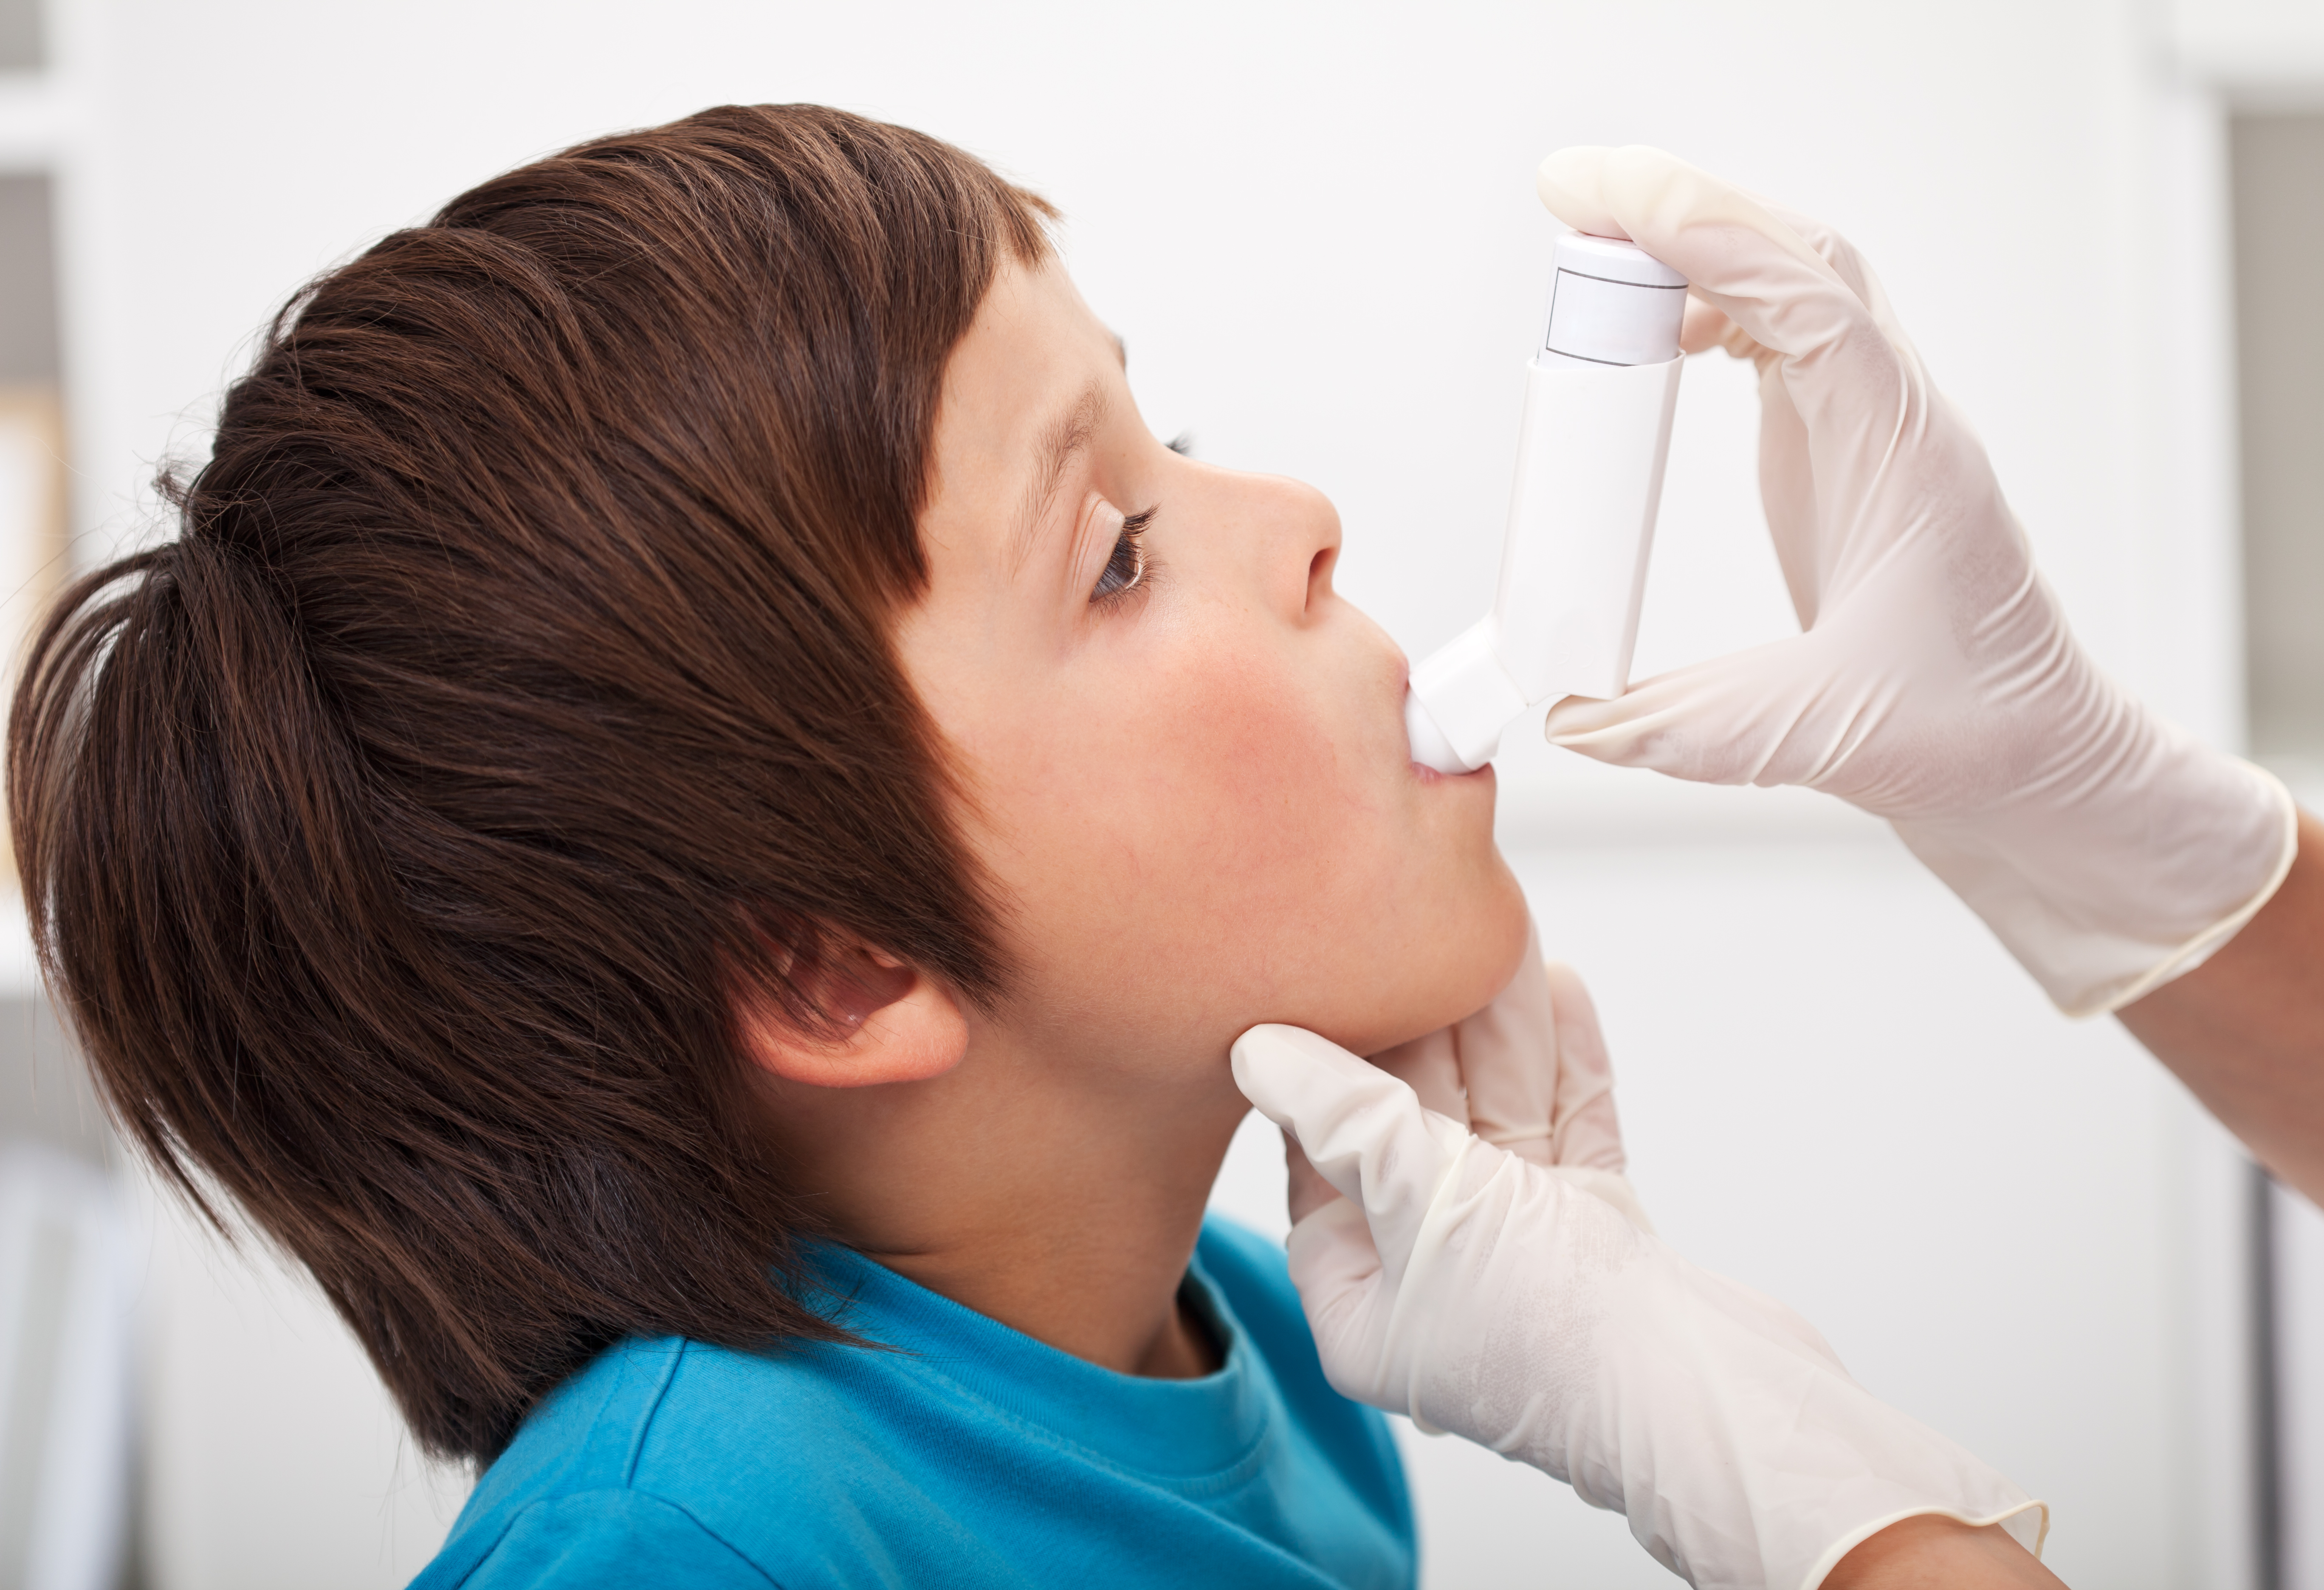 Researchers Reveal that Blood Lipid Levels in Children Correlate with Asthma and Allergies